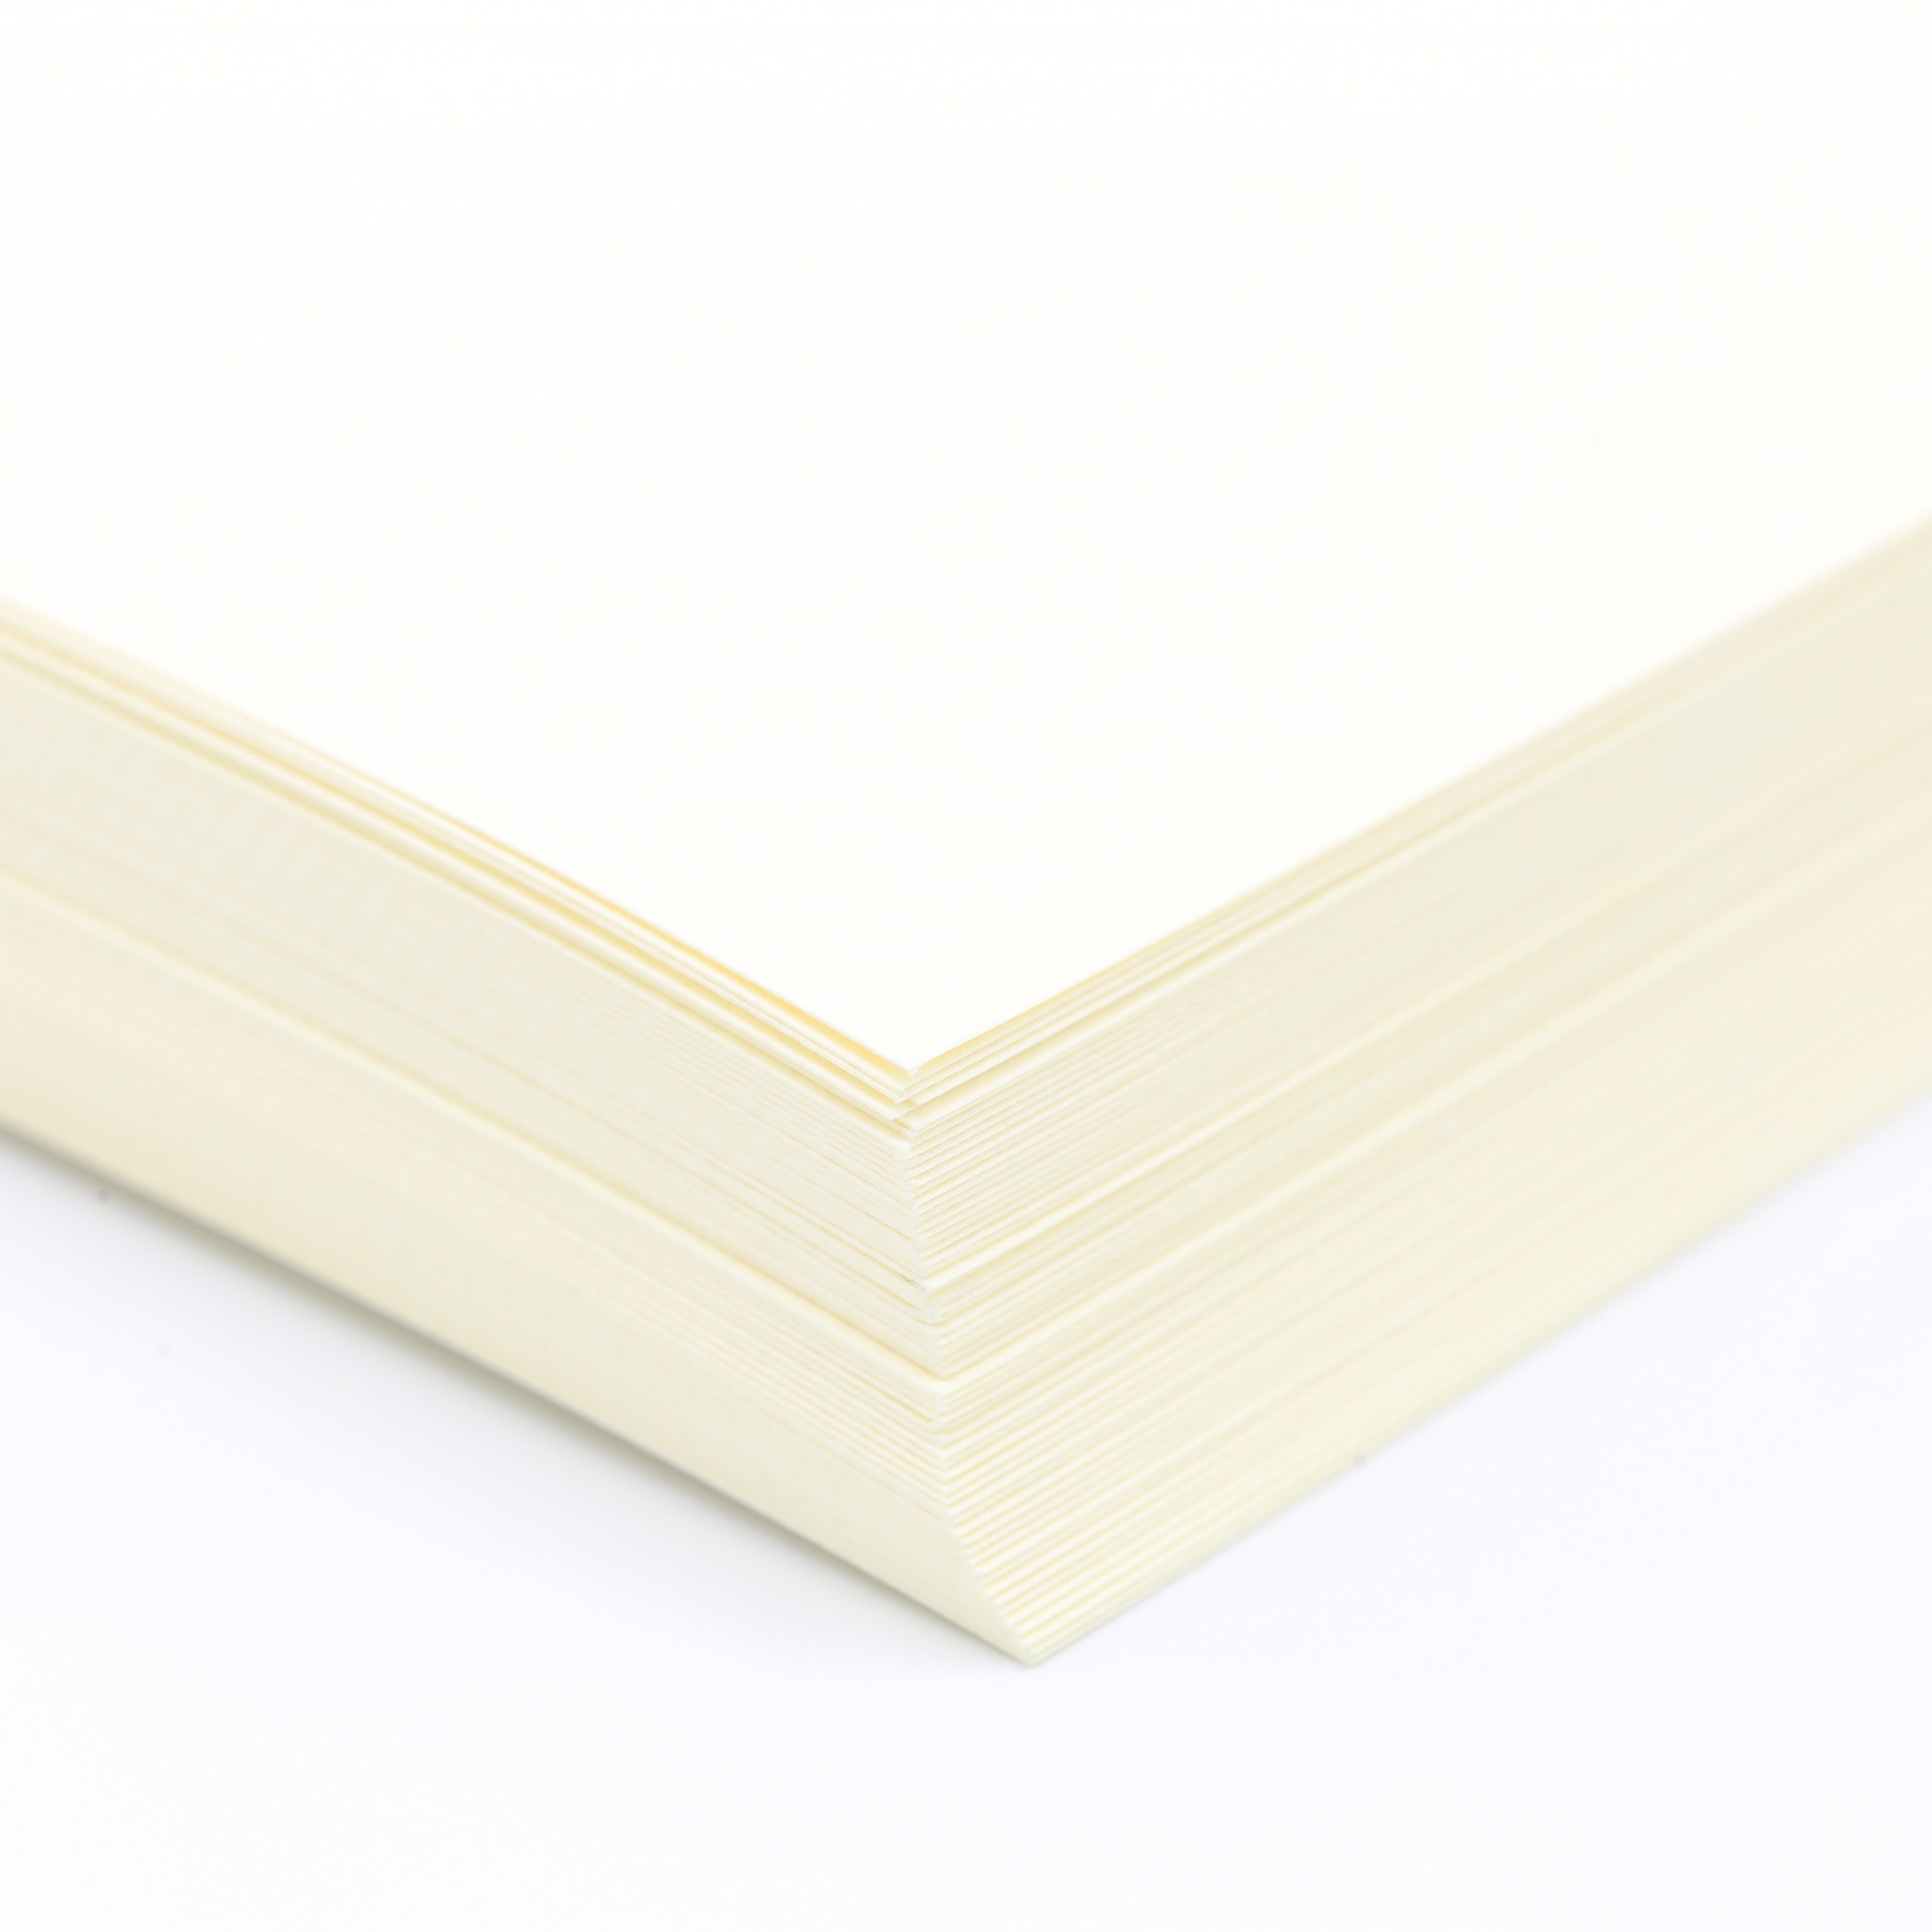 Cream Thick Paper Cardstock - for Brochure, Invitations, Stationary  Printing | 80 lb Card Stock | 8.5 x 11 inch | Heavy Weight Cover Stock (216  gsm)